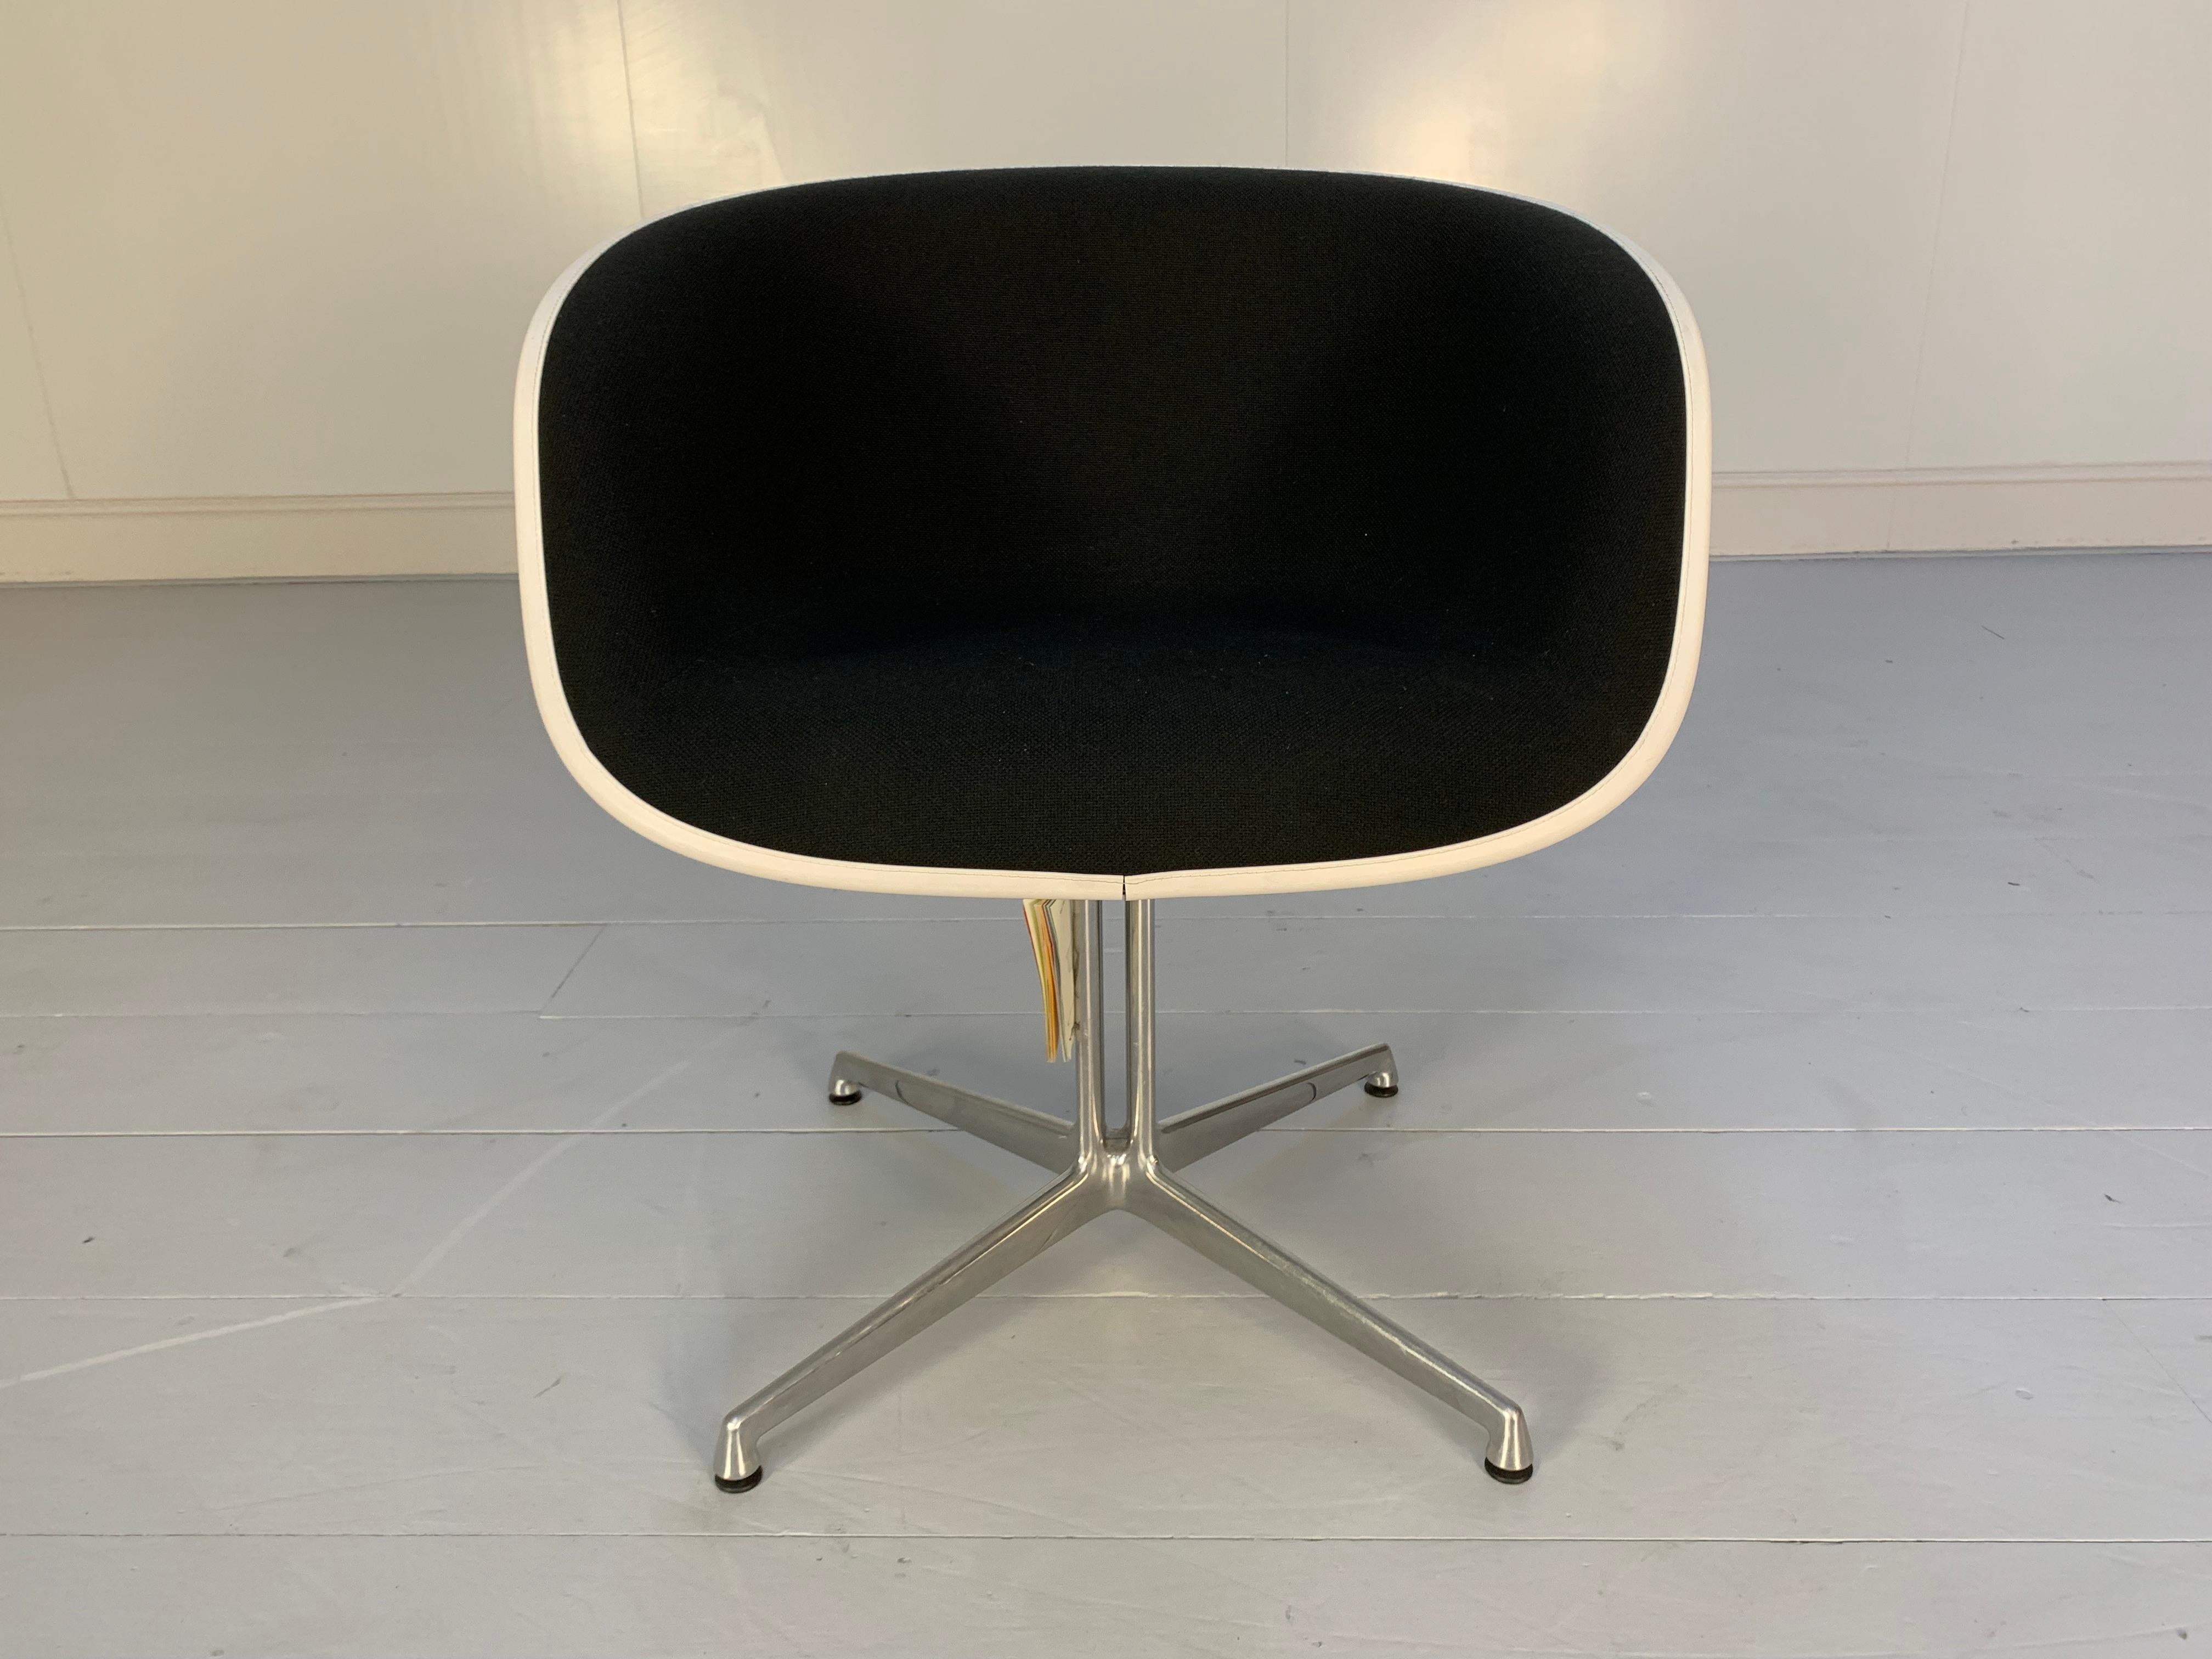 Vitra “La Fonda” Eames Chair & Marble Table in Black Hopsack For Sale 2